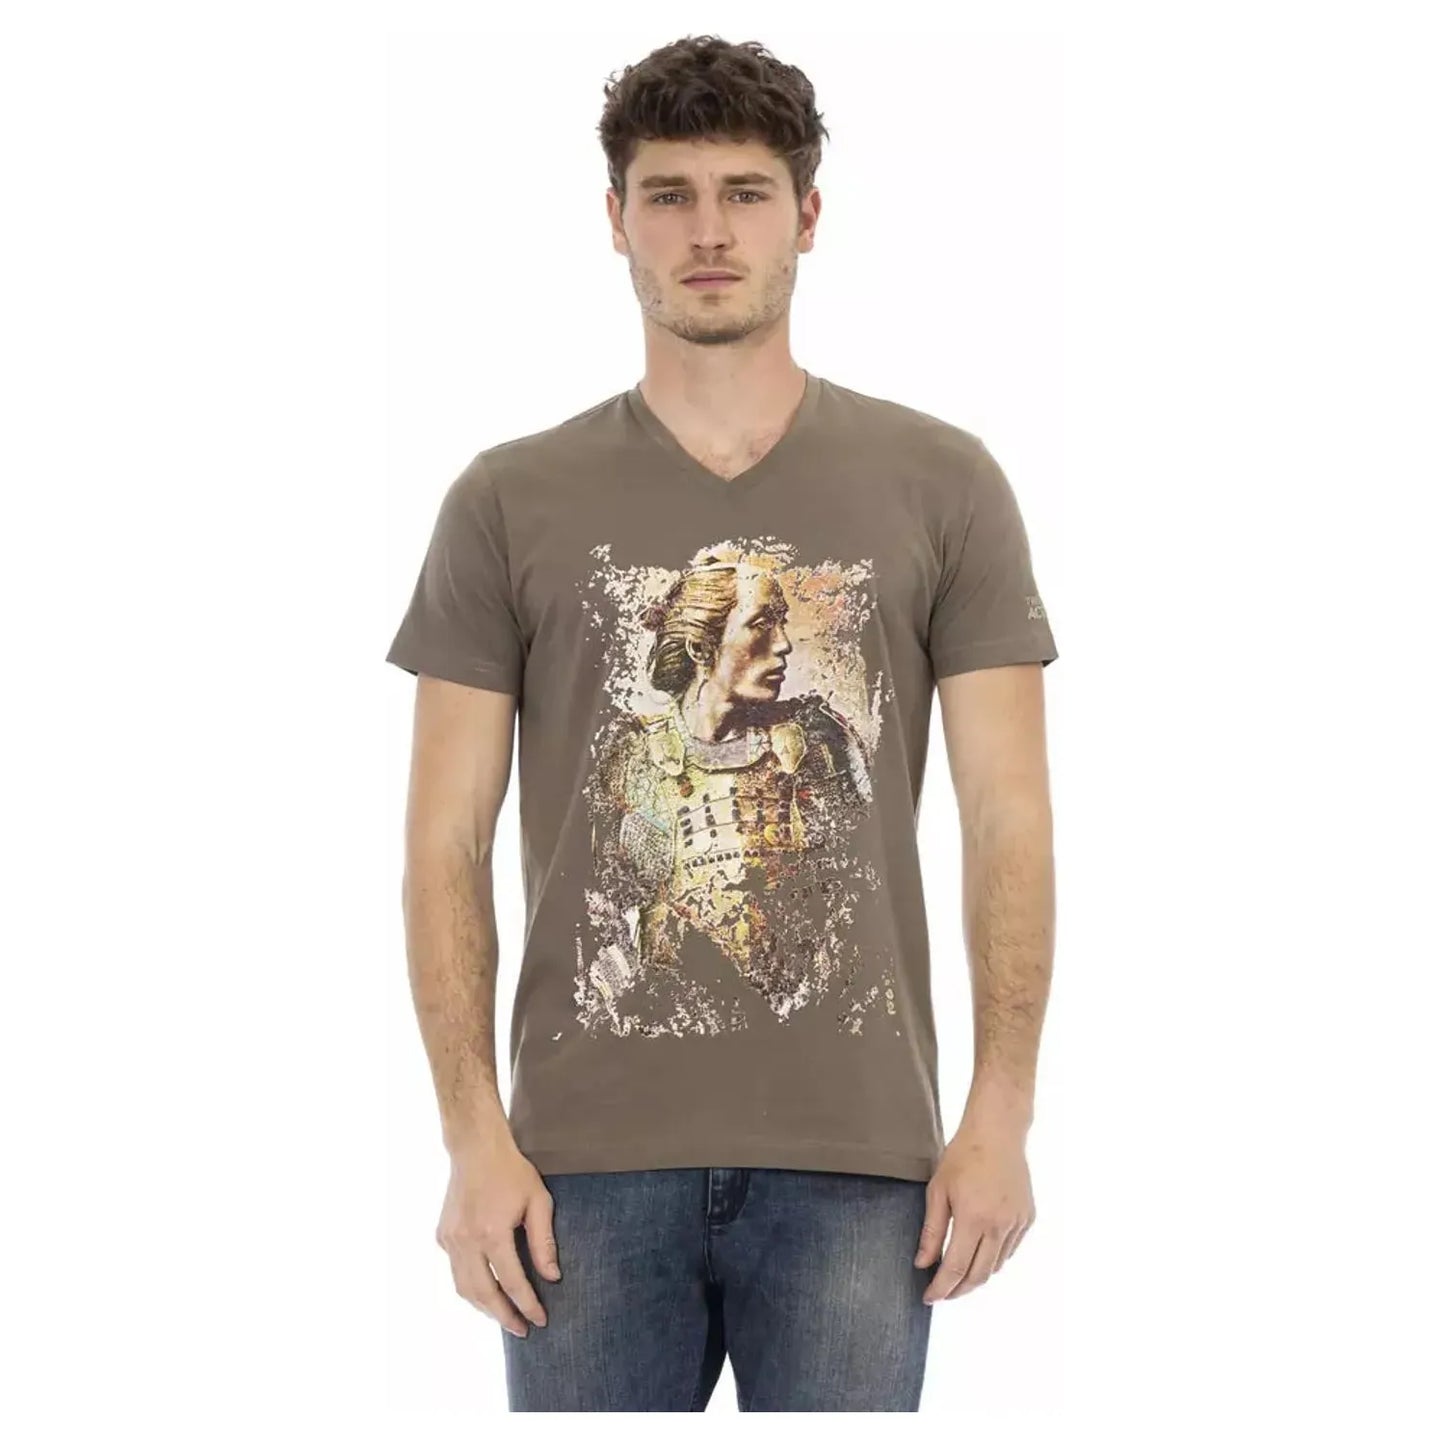 Trussardi Action Elegant V-Neck Tee with Chic Front Print brown-cotton-t-shirt-9